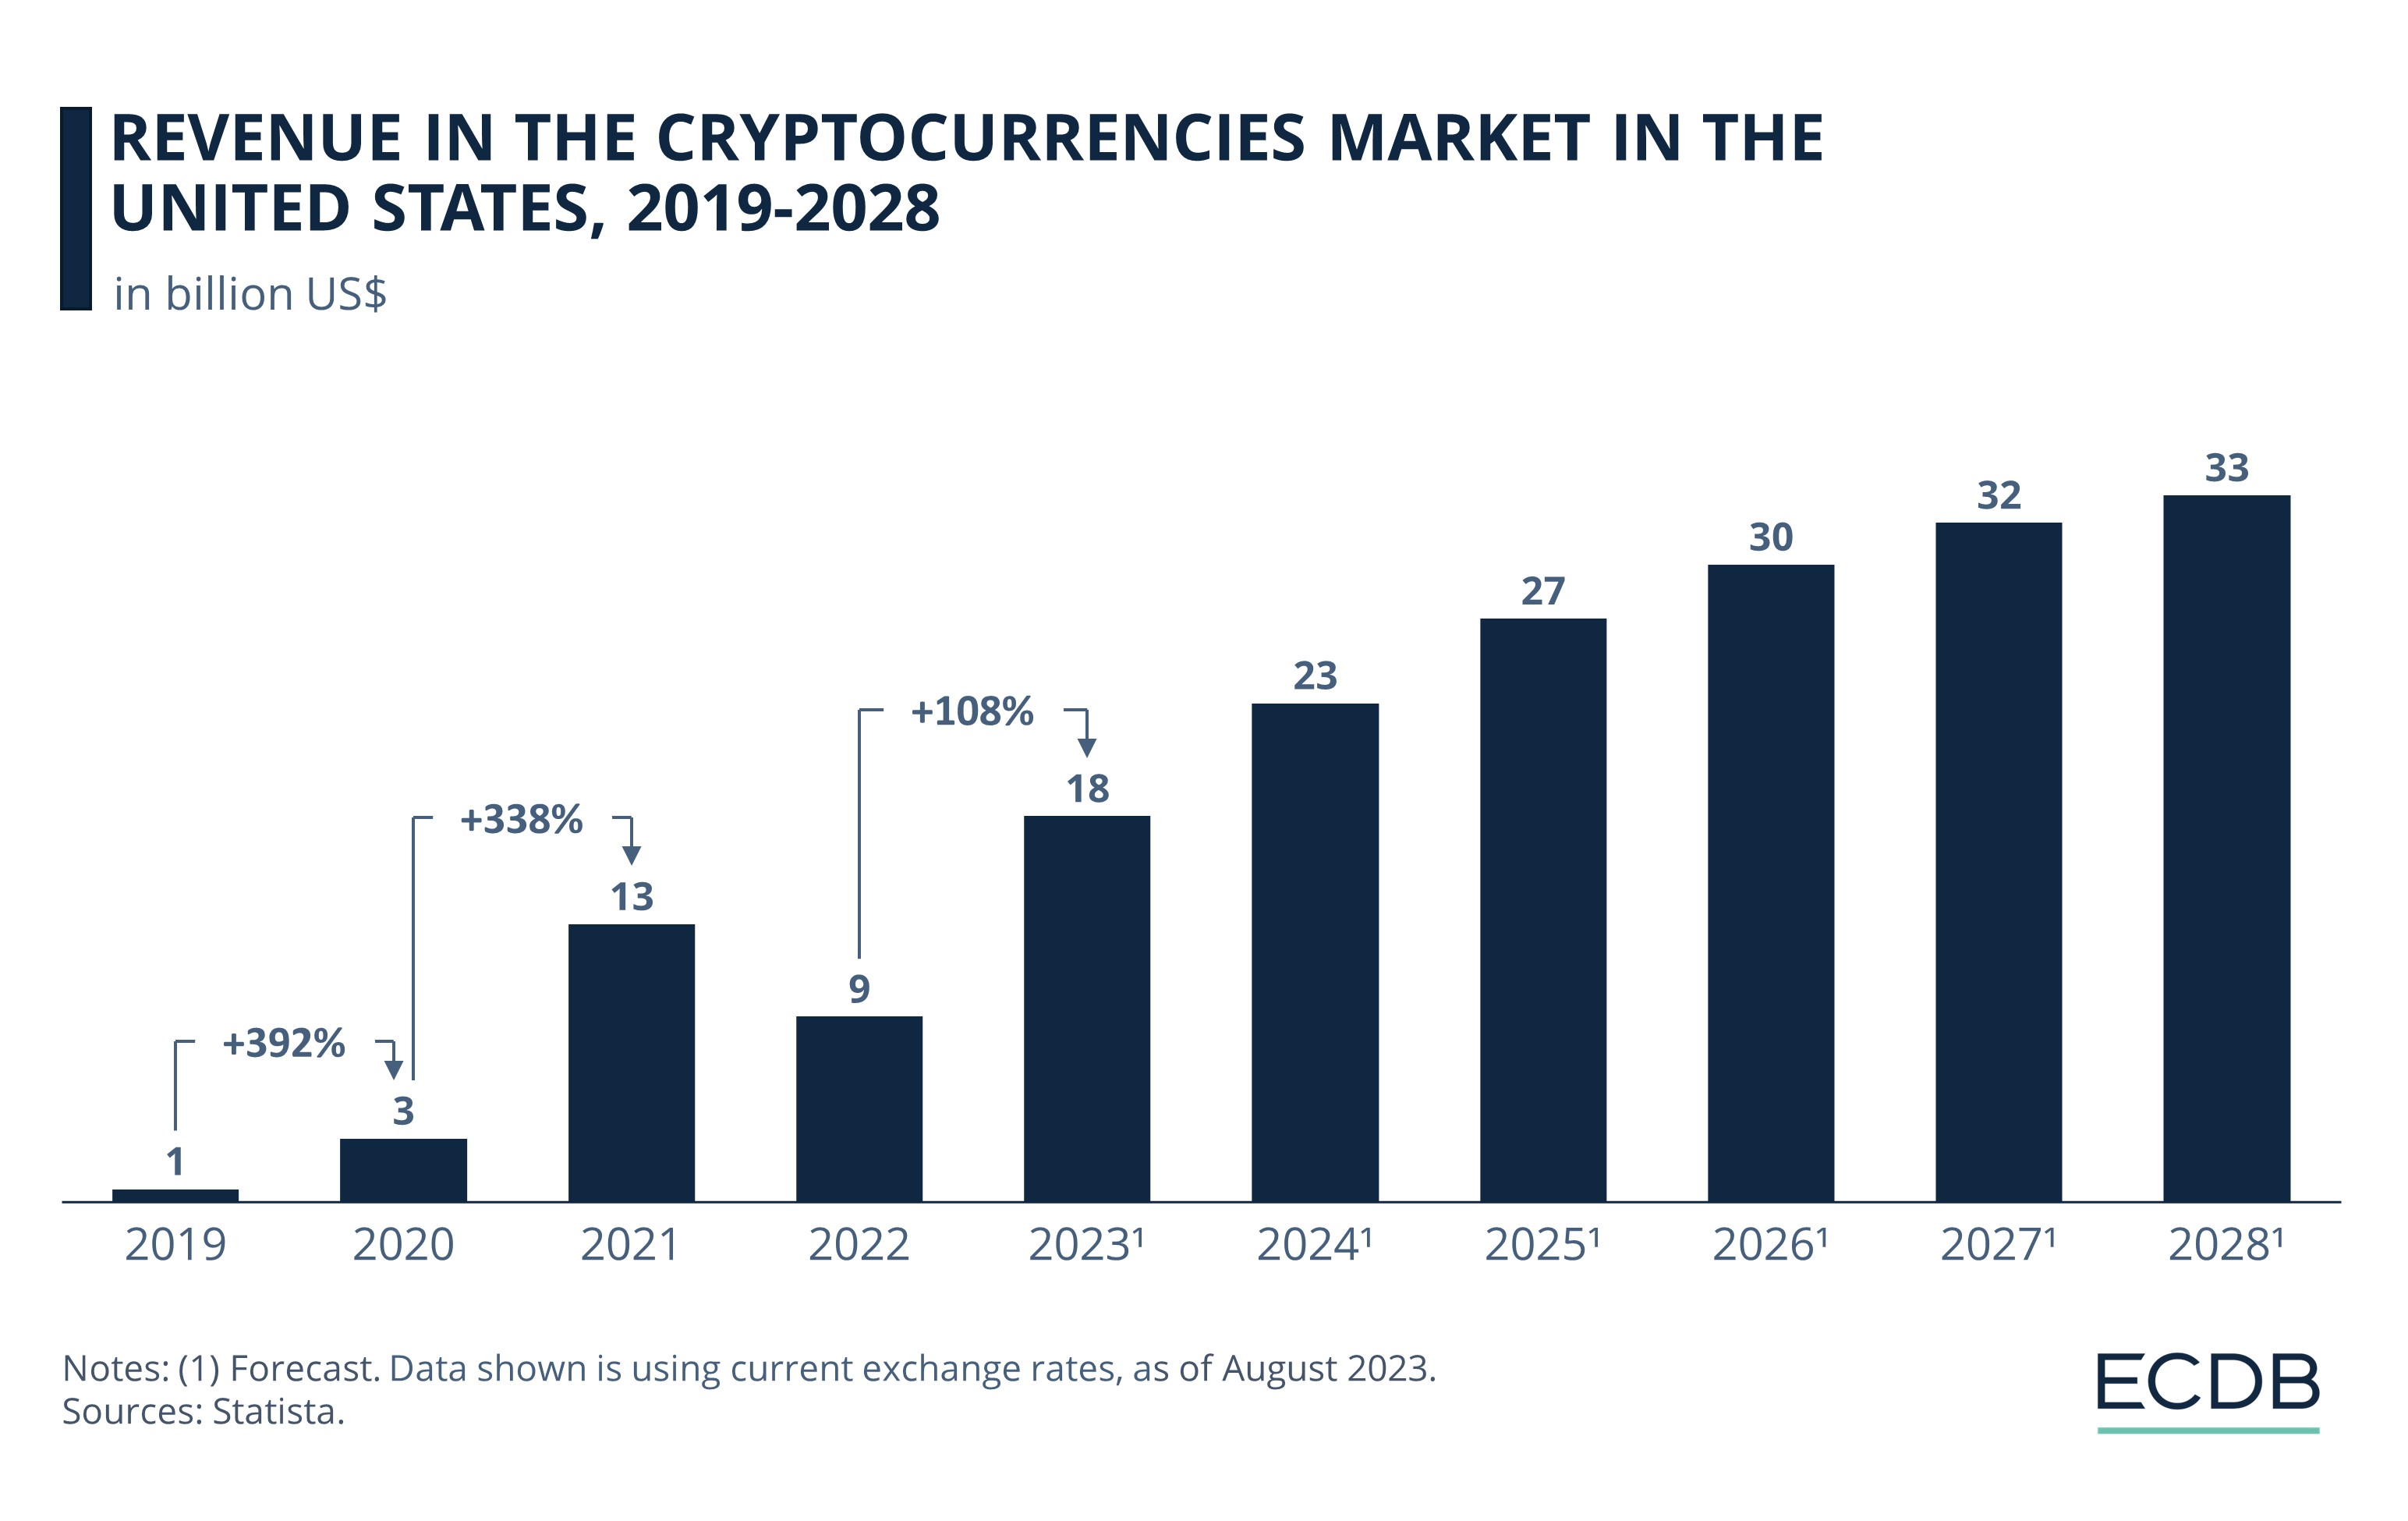 Revenue in the Cryptocurrencies Market in the United States, 2019-2028